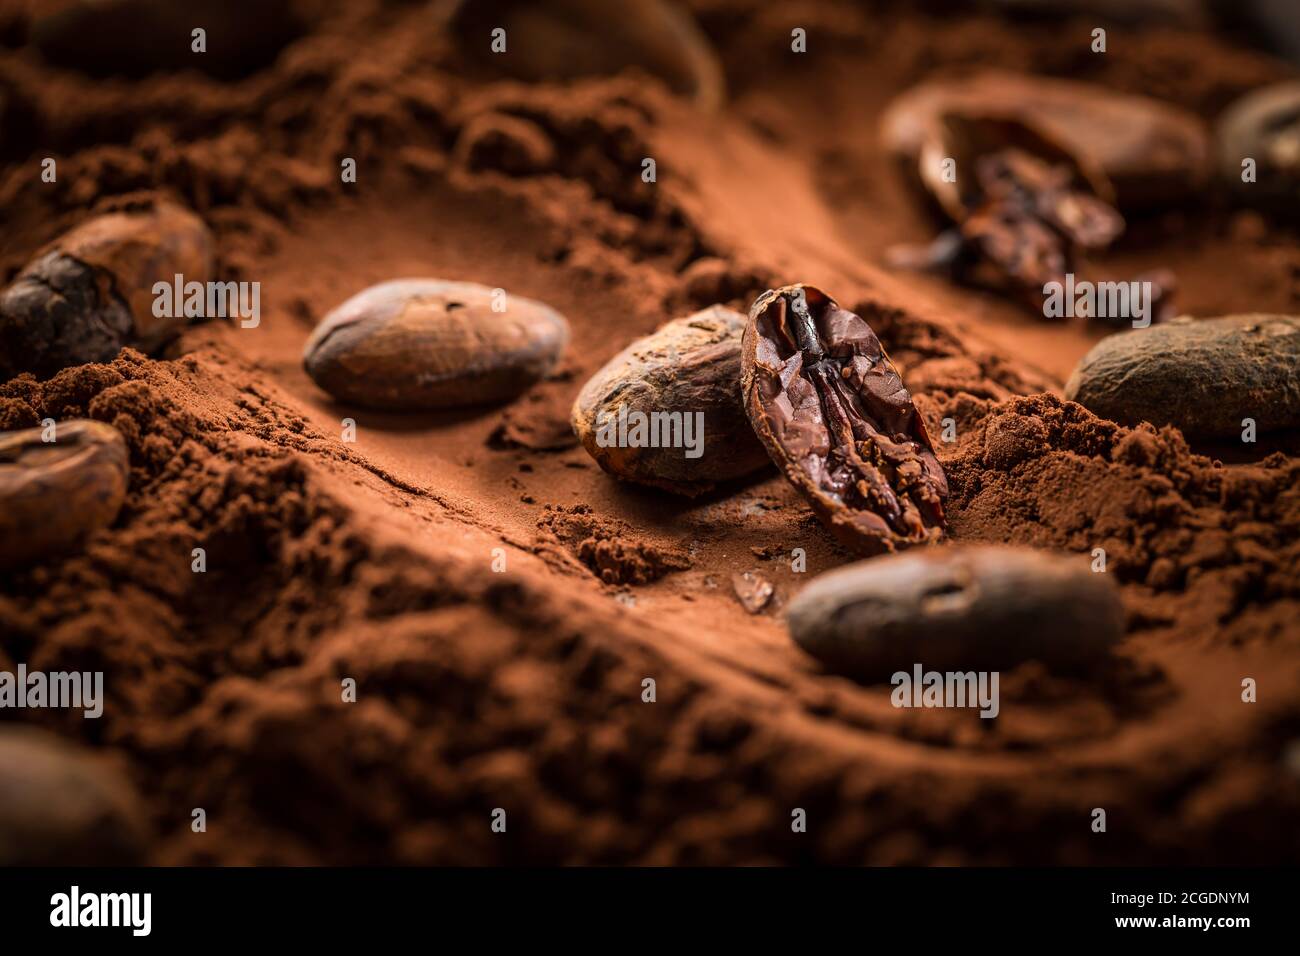 Organic cocoa powder with cocoa beans for baking. Baking and cooking ingredients. Stock Photo